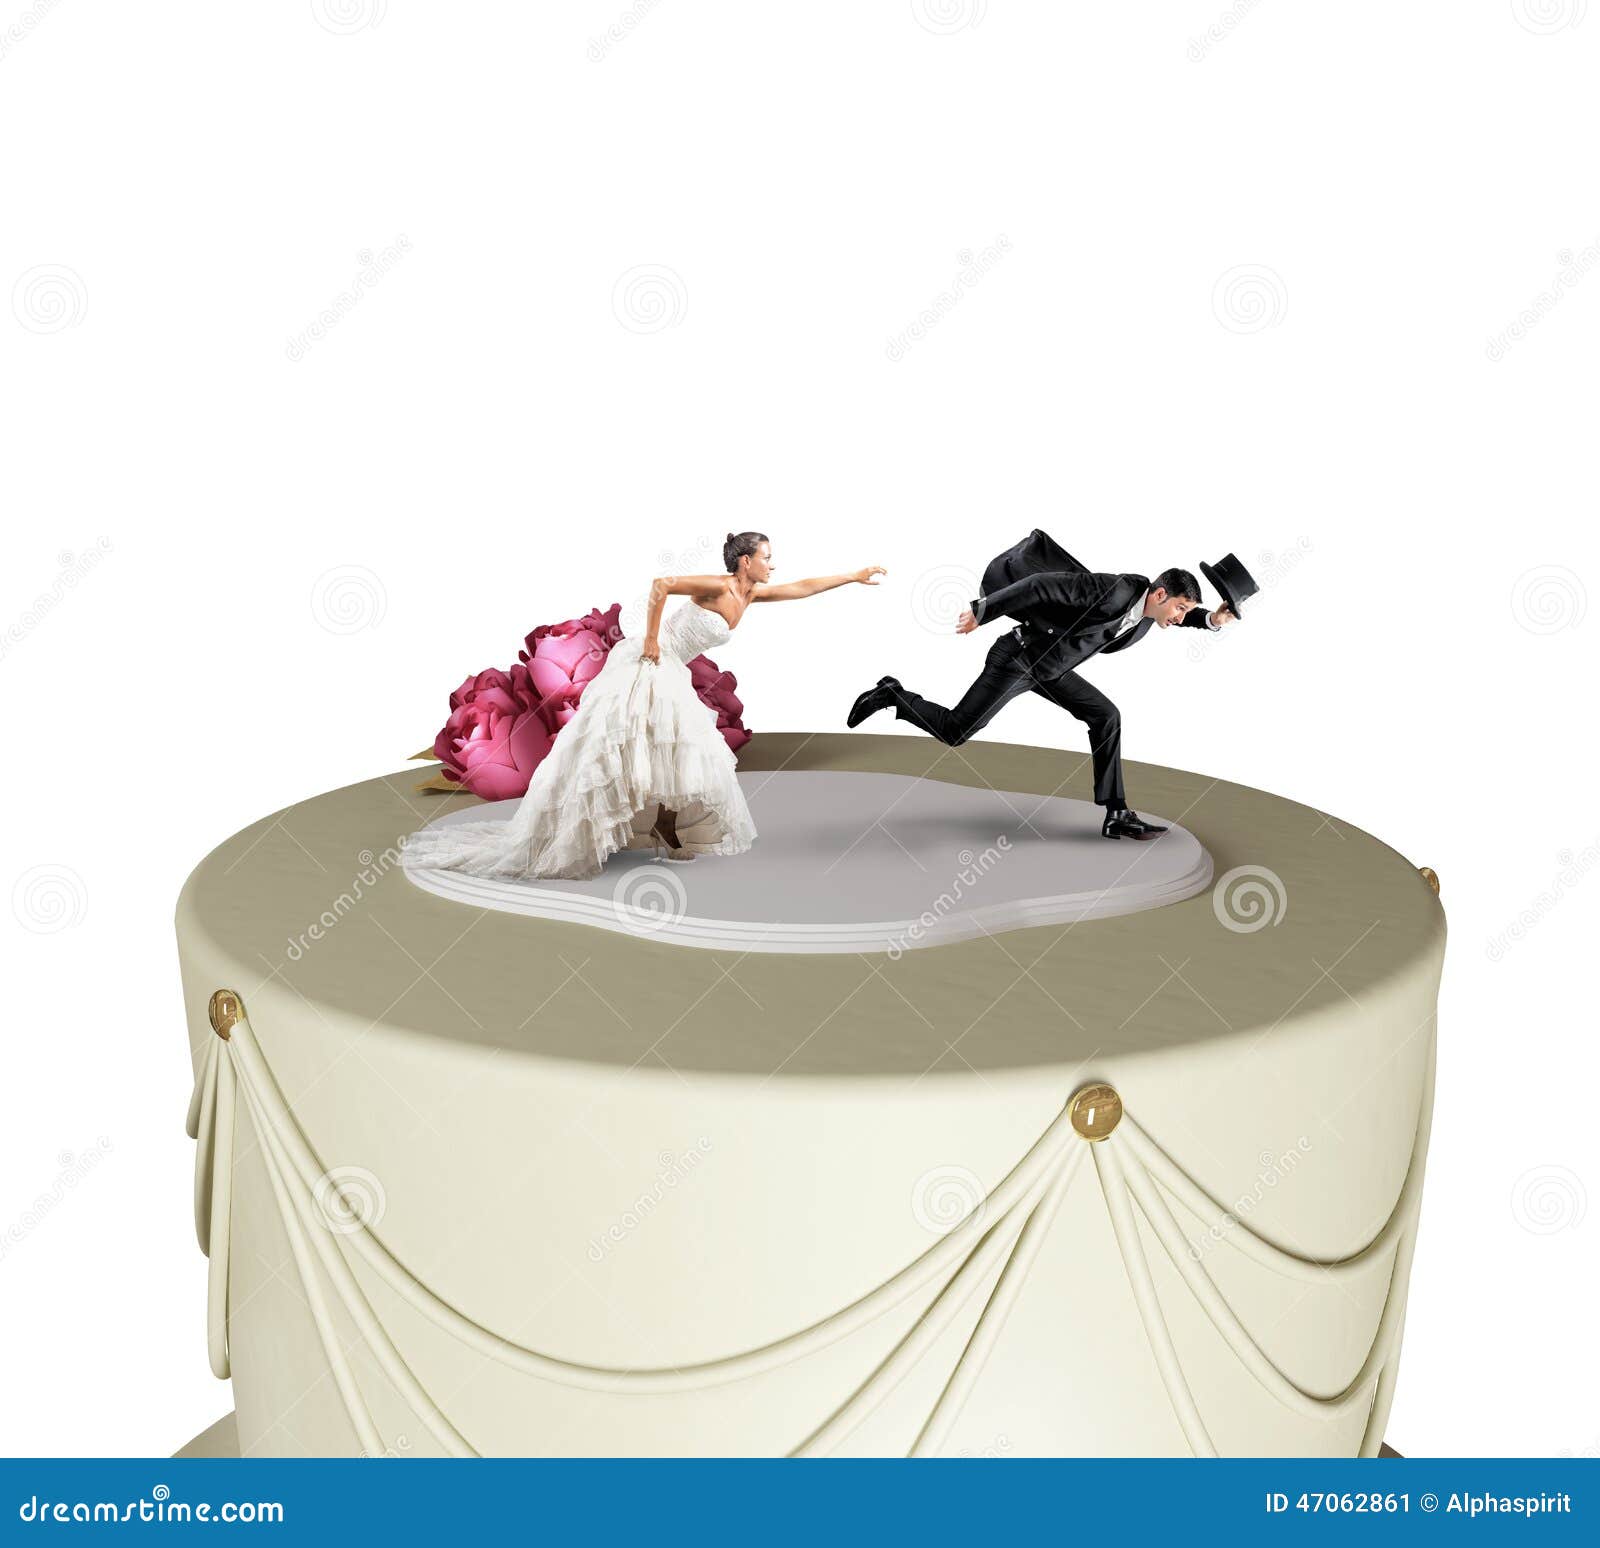 Escape from marriage stock image. Image of effort, people - 47062861